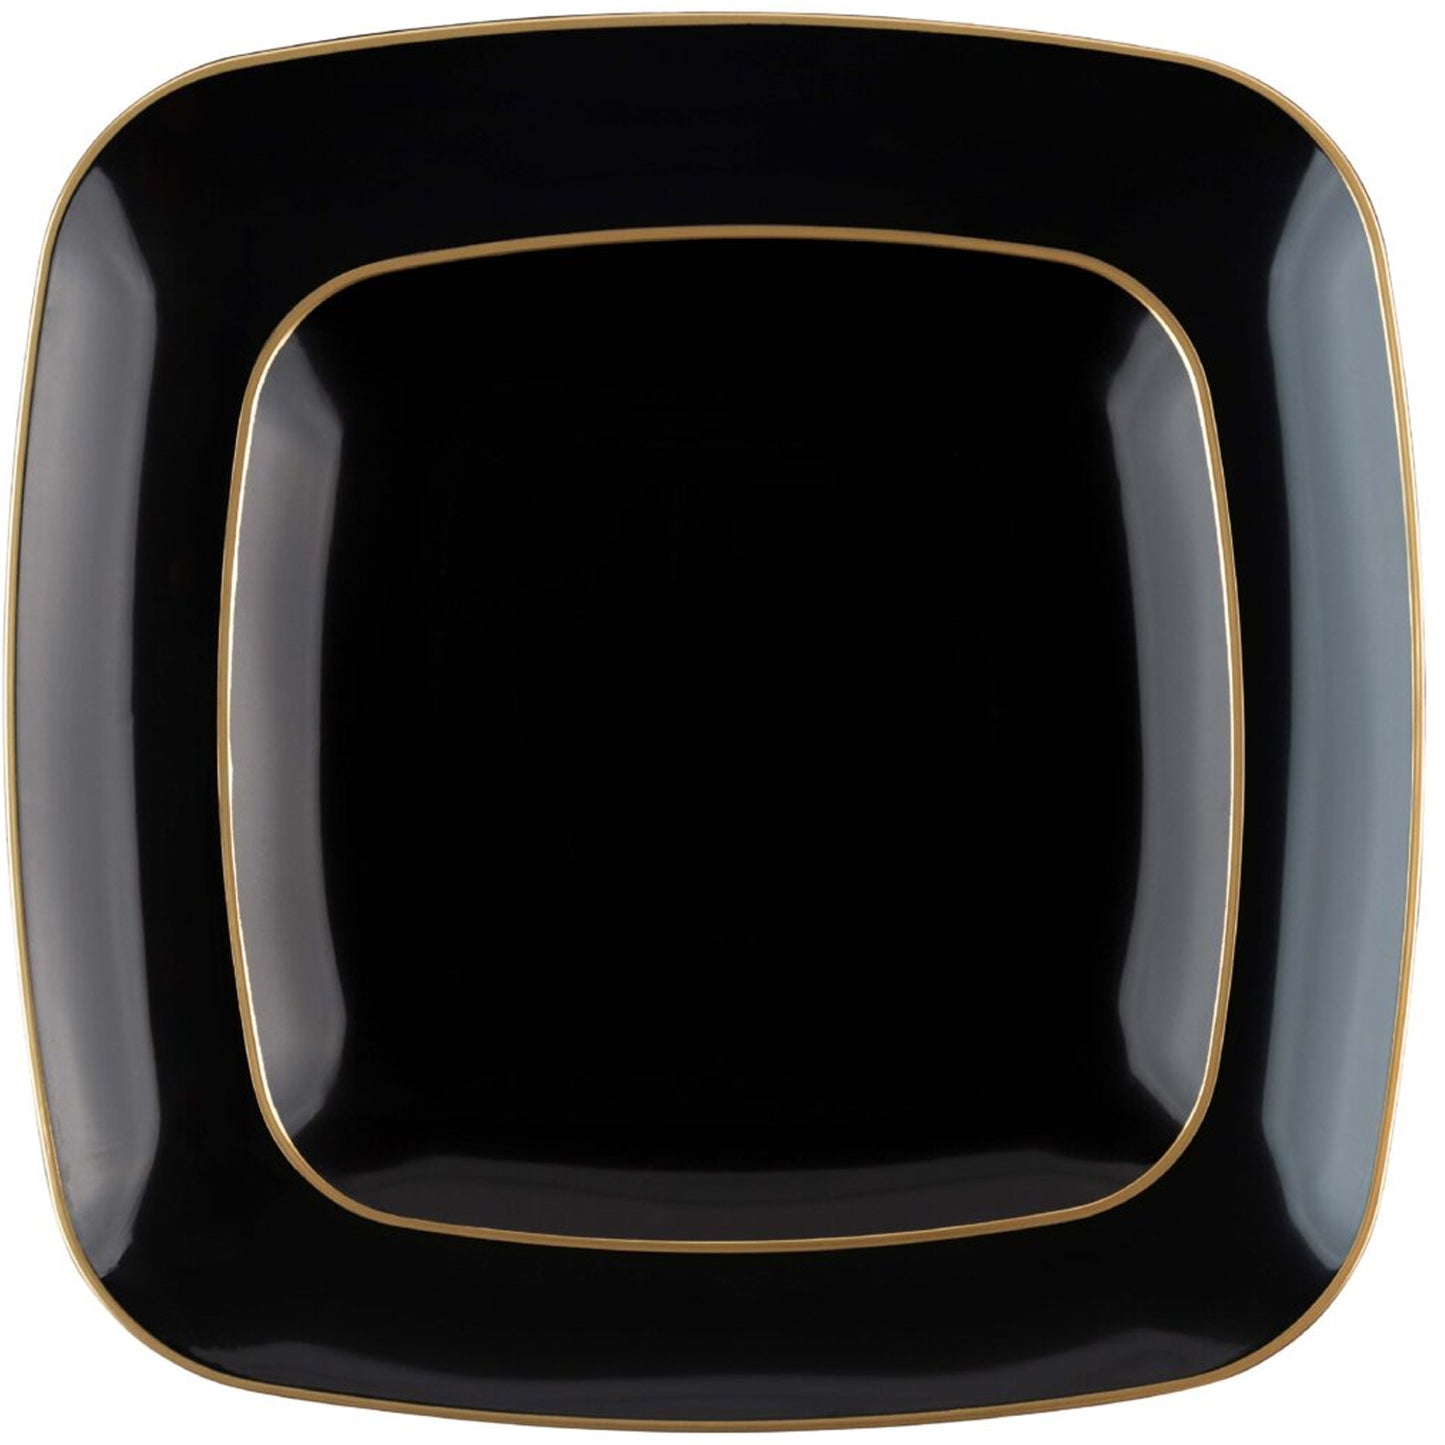 Organic Collection Black and Gold Rim Square Dinner Plates 7.25" Tablesettings Blue Sky   